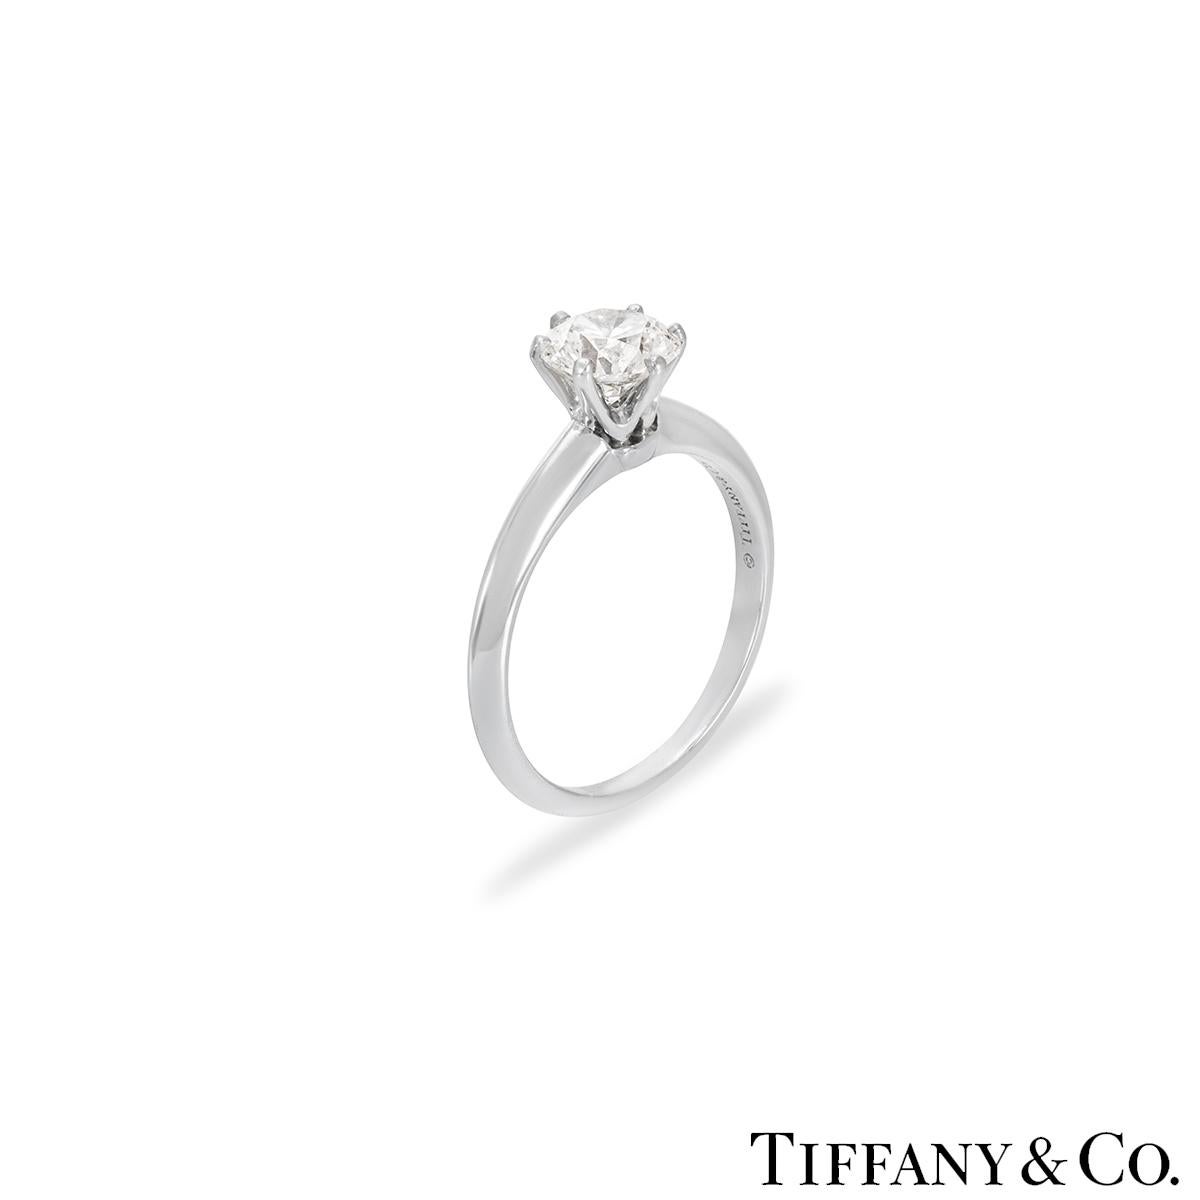 A beautiful platinum diamond ring by Tiffany & Co. from The Setting collection. The ring comprises of a round brilliant cut diamond in a 6 claw setting with a weight of 1.14ct, H colour and VVS1 clarity. The ring is a size UK M ½ / EU 53 / US 6 1/4	